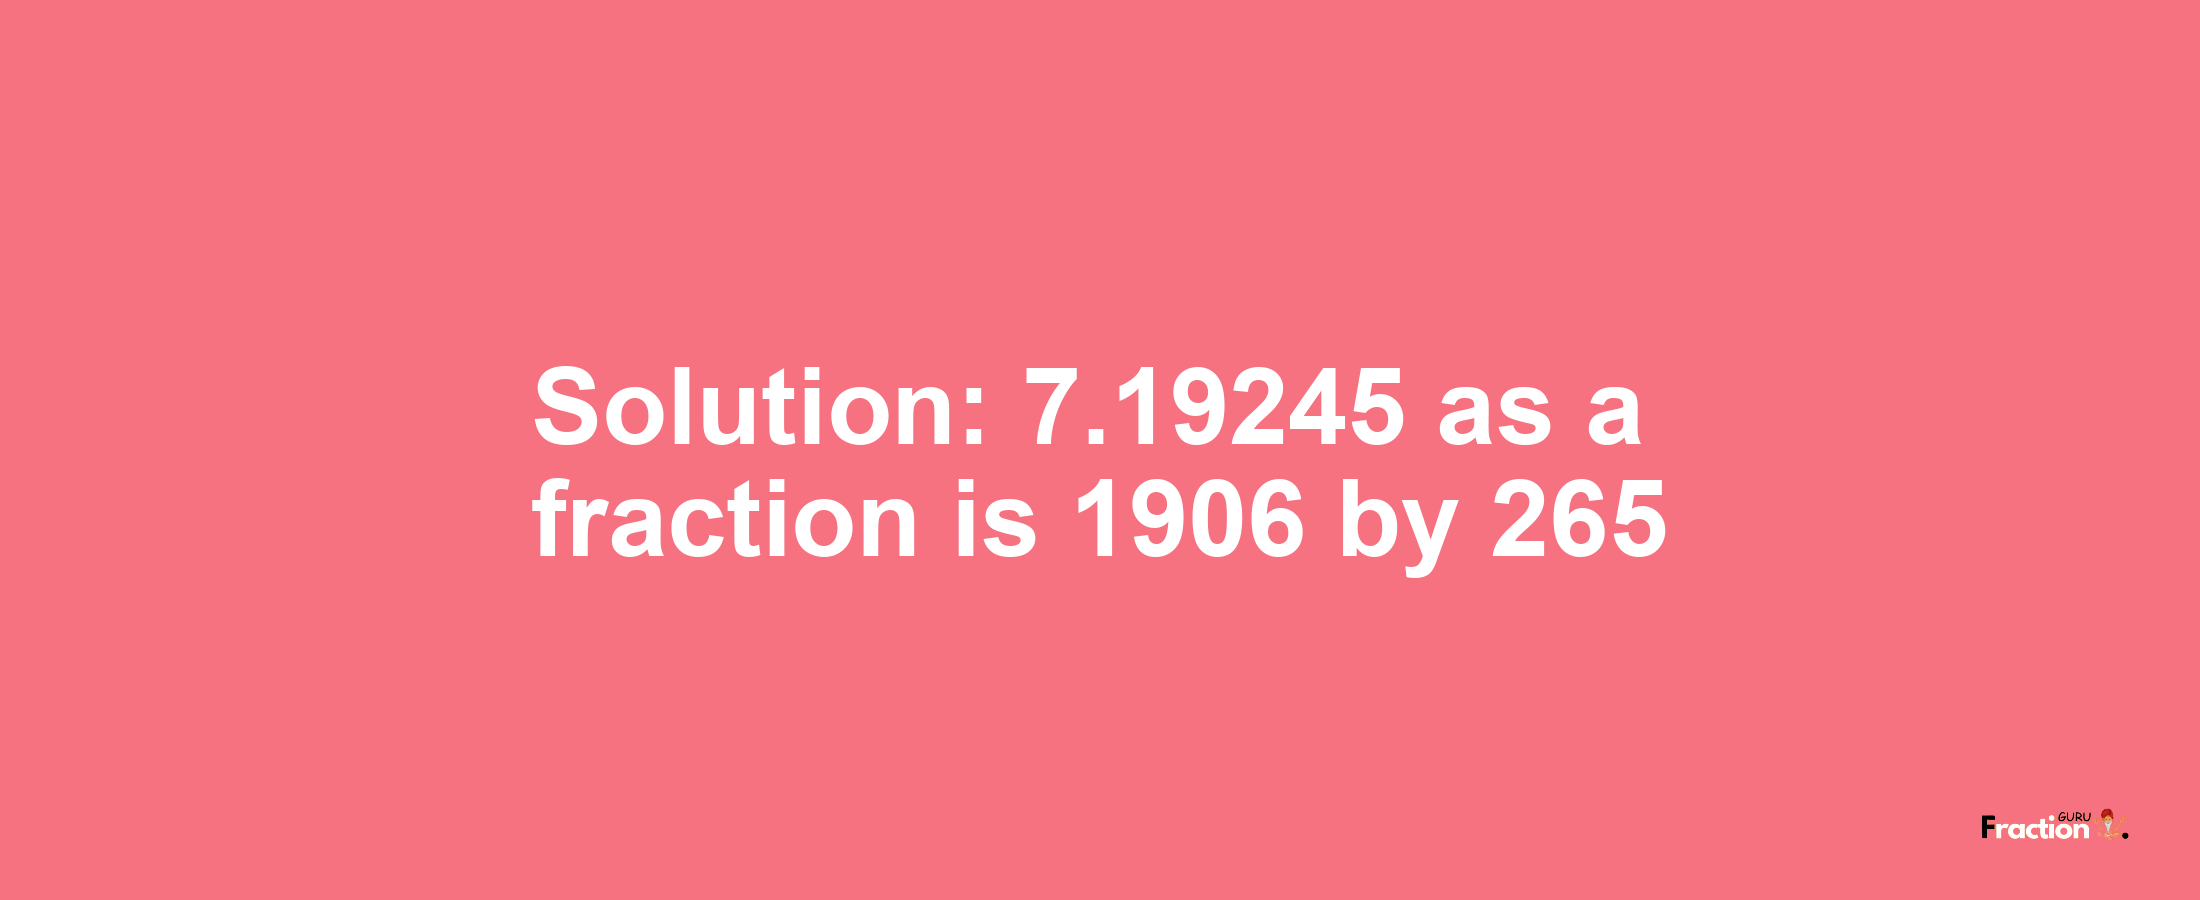 Solution:7.19245 as a fraction is 1906/265